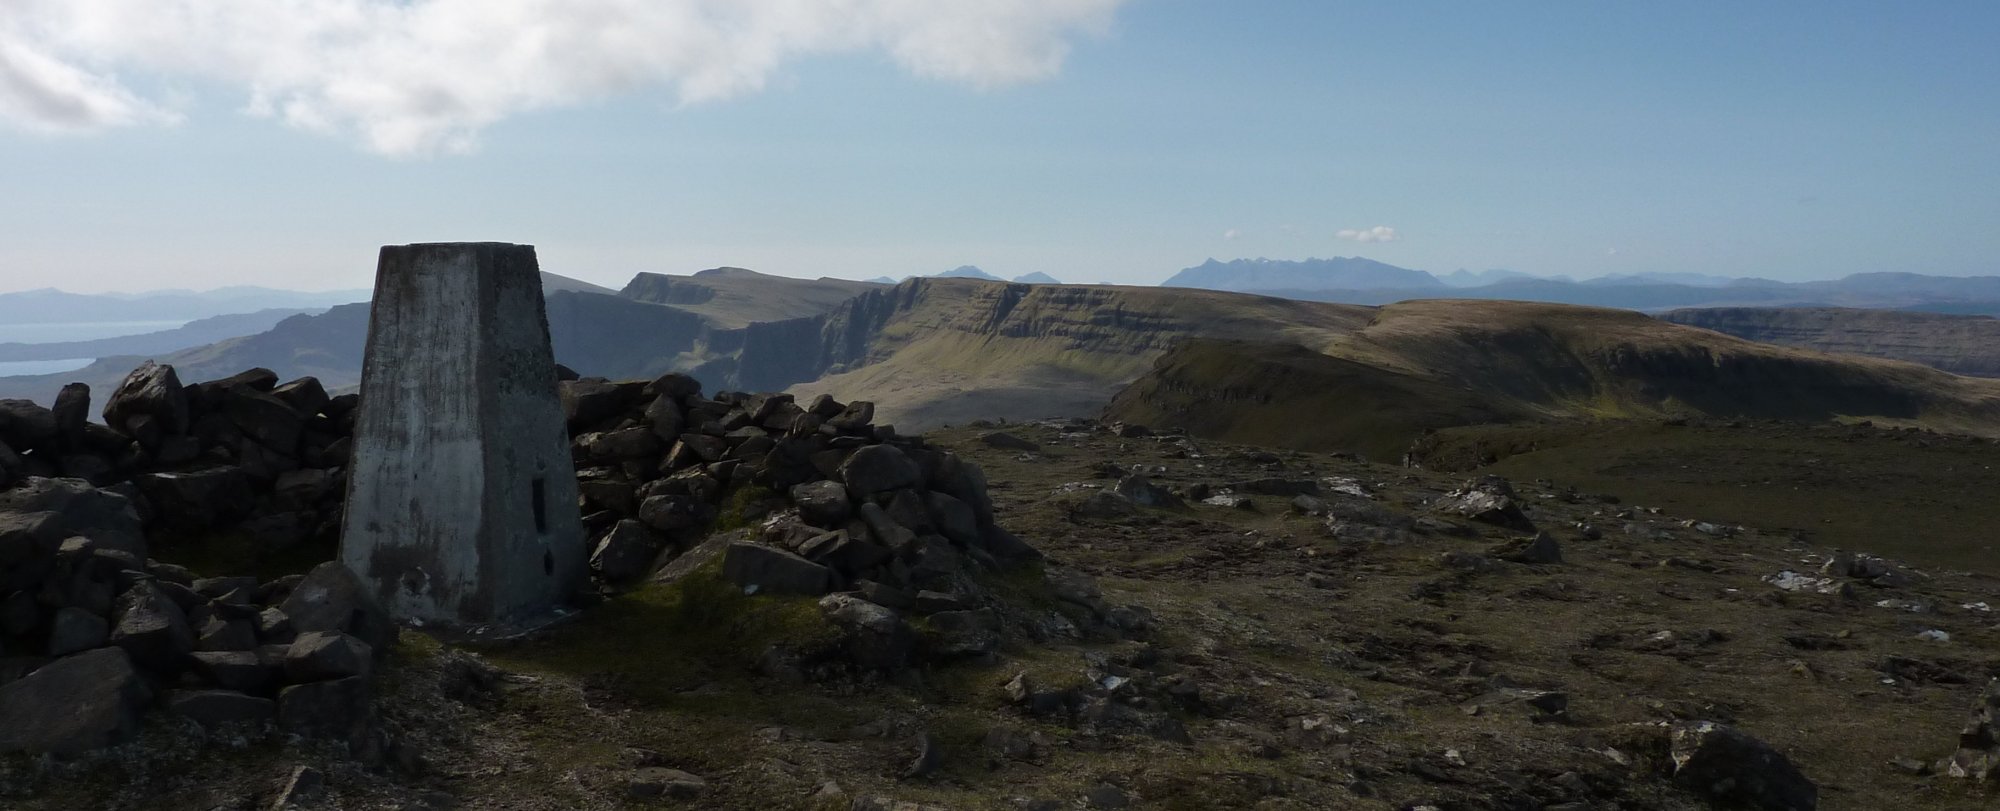 The view from Beinn Edra trig point